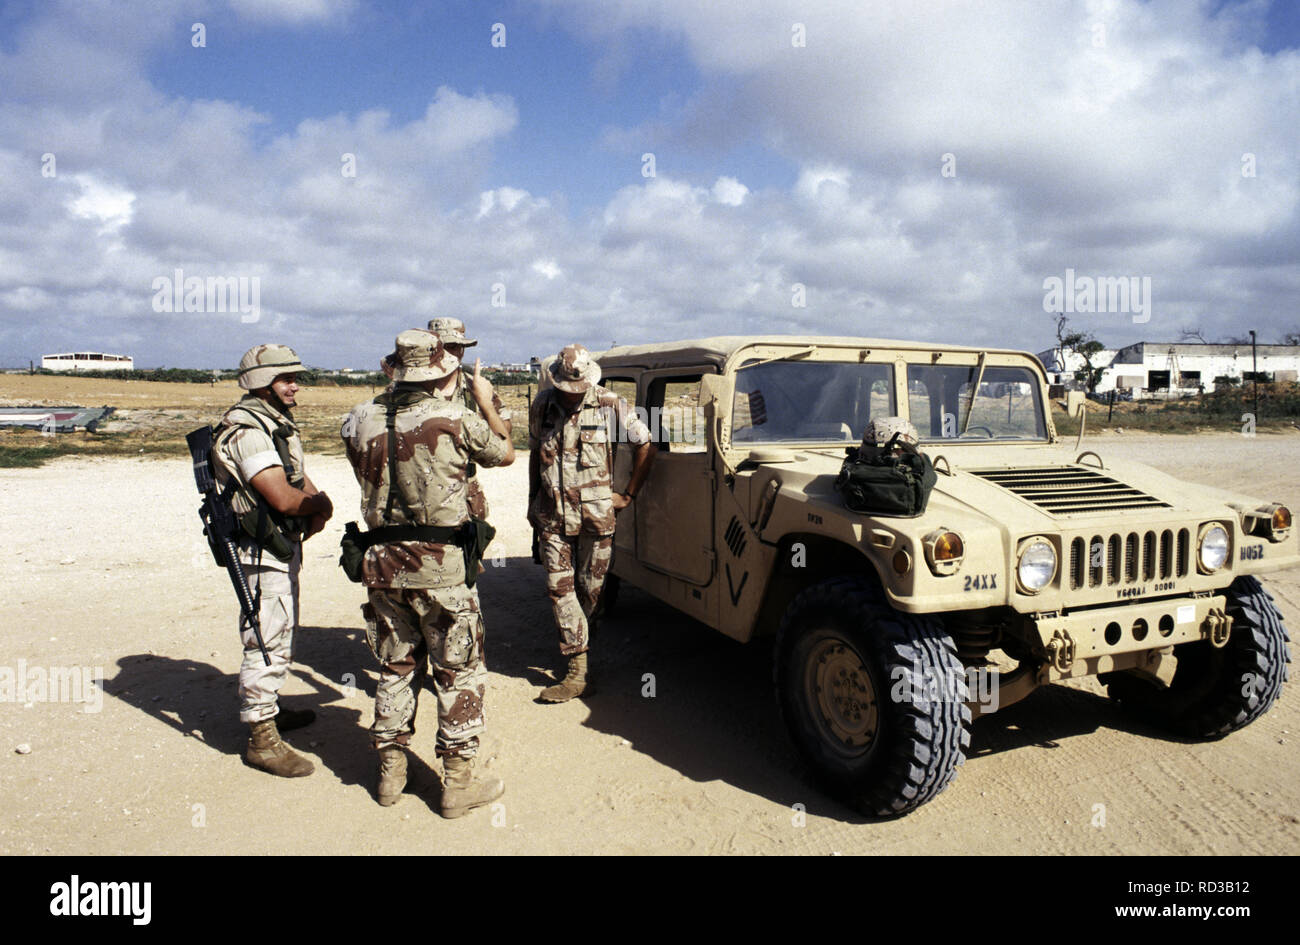 12th October 1993 A group of U.S. Army soldiers stand next to a Humvee in the UNOSOM headquarters compound in Mogadishu, Somalia. Stock Photo